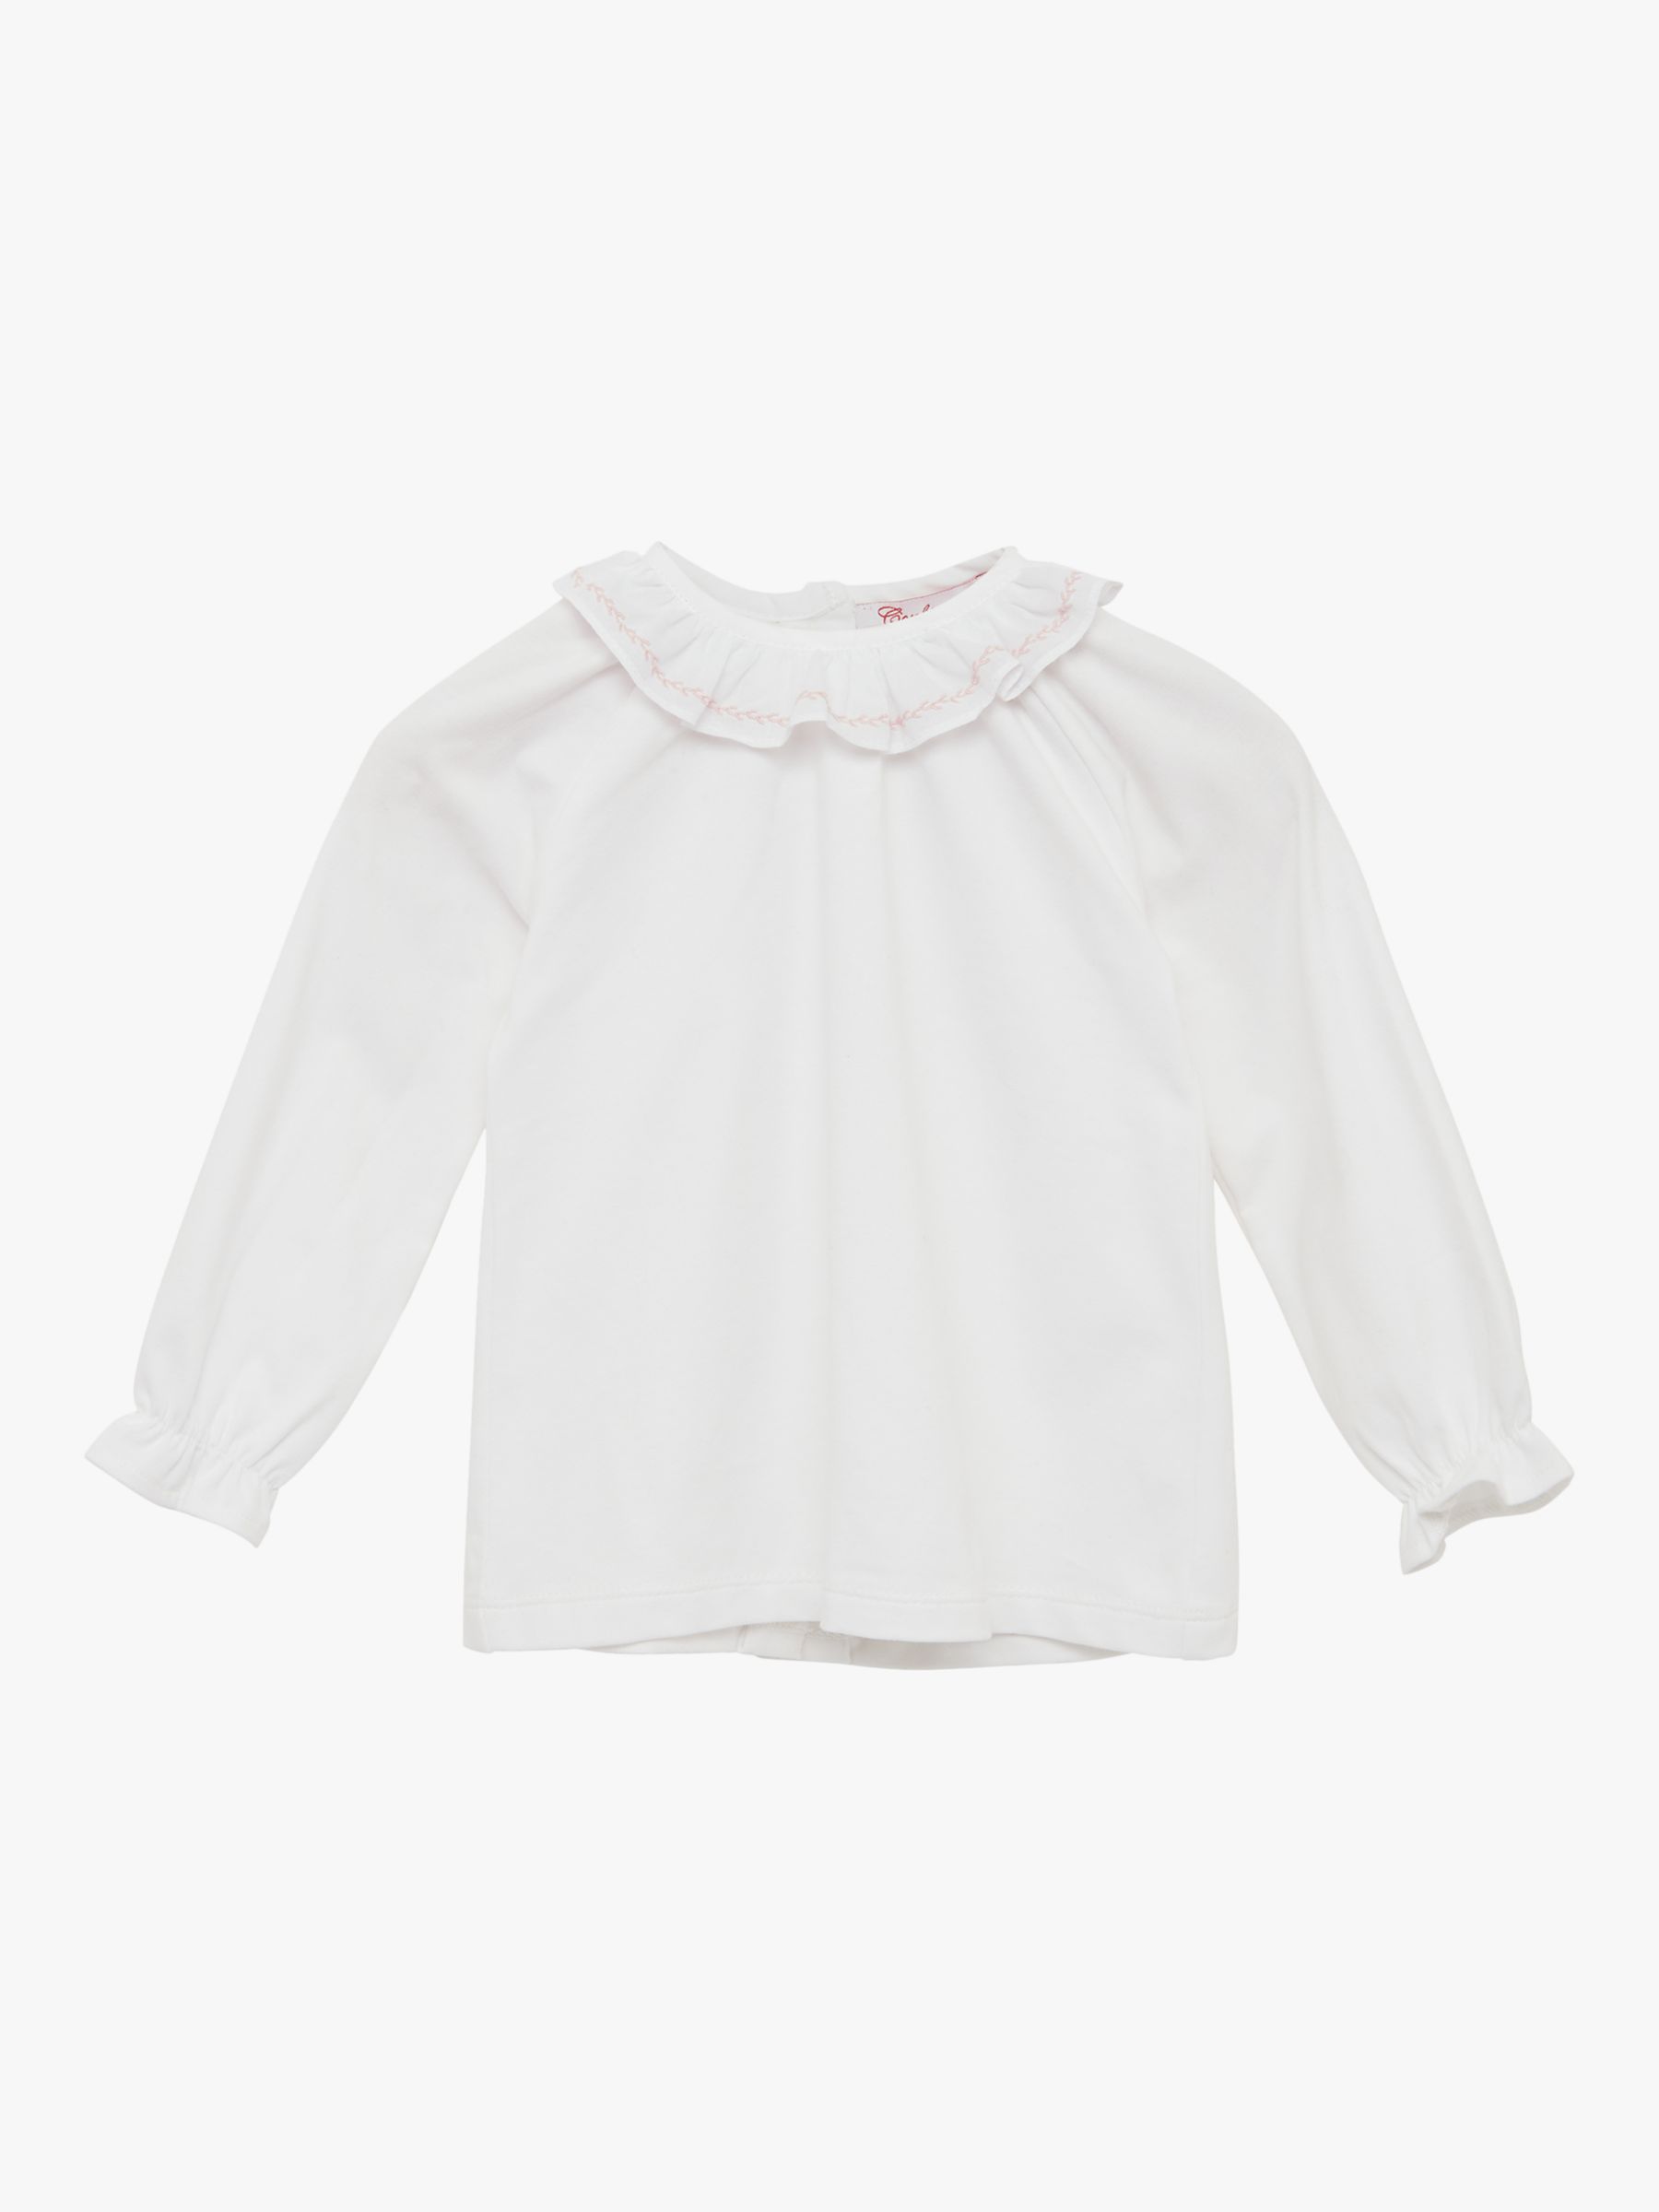 Trotters Baby Lucy Willow Collar Blouse, White at John Lewis & Partners